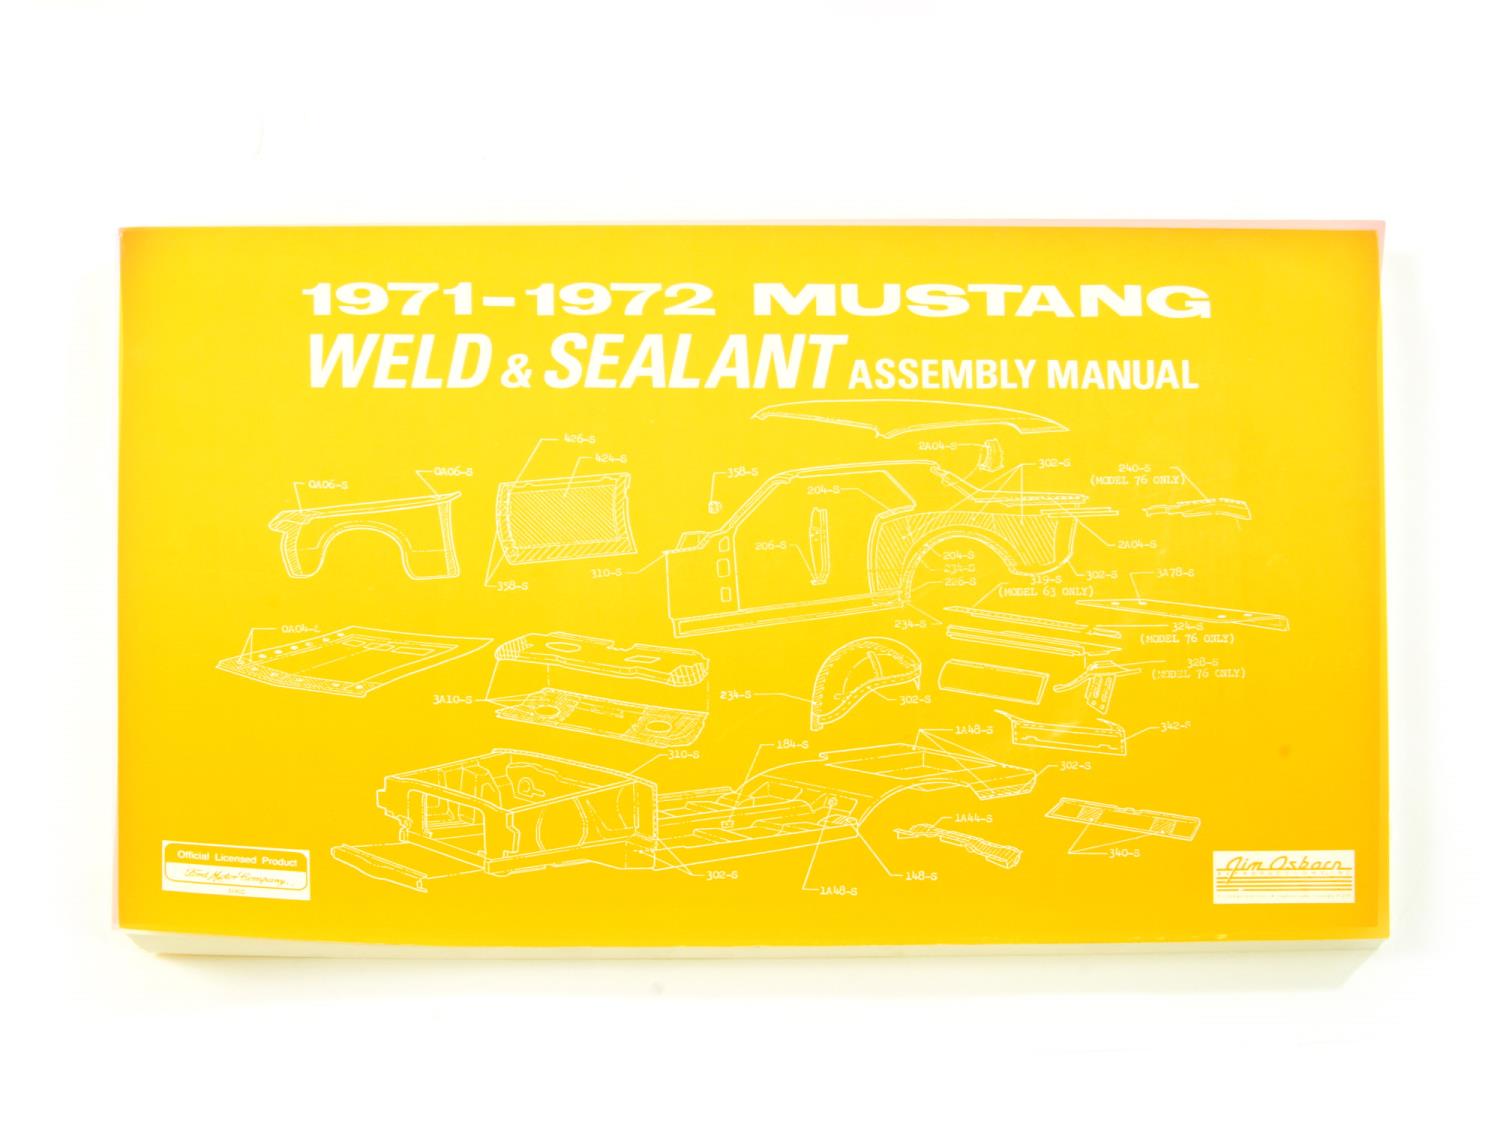 Weld & Sealant Assembly Manual for 1971-1972 Ford